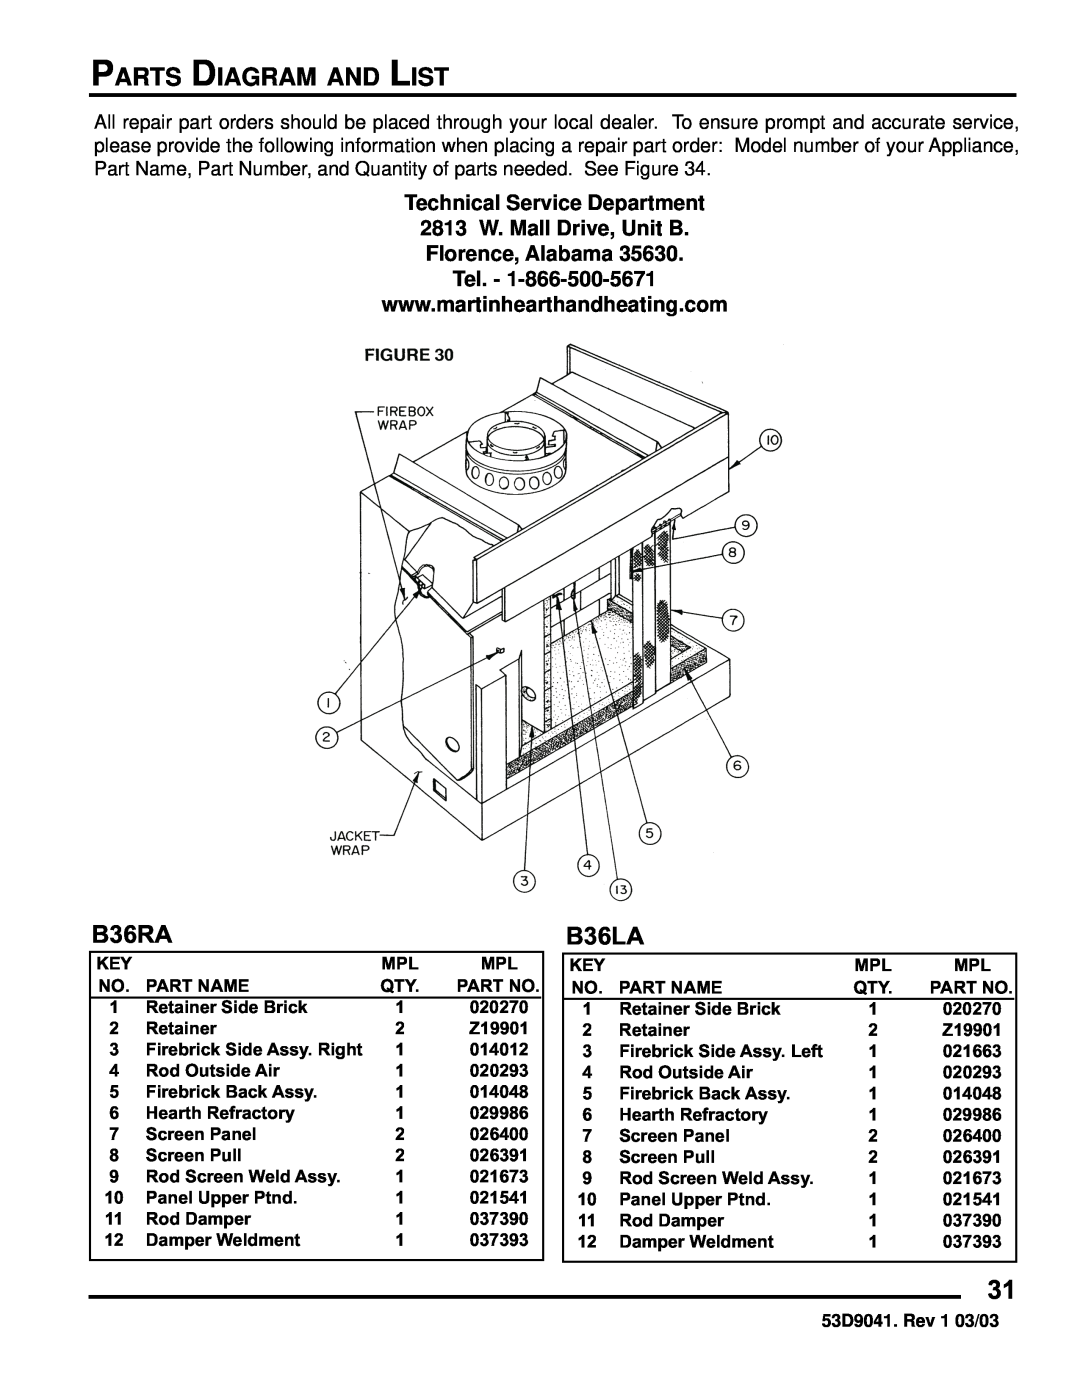 Martin Fireplaces B36LA Parts Diagram And List, B36RA, Technical Service Department, No. Part Name, Retainer Side Brick 